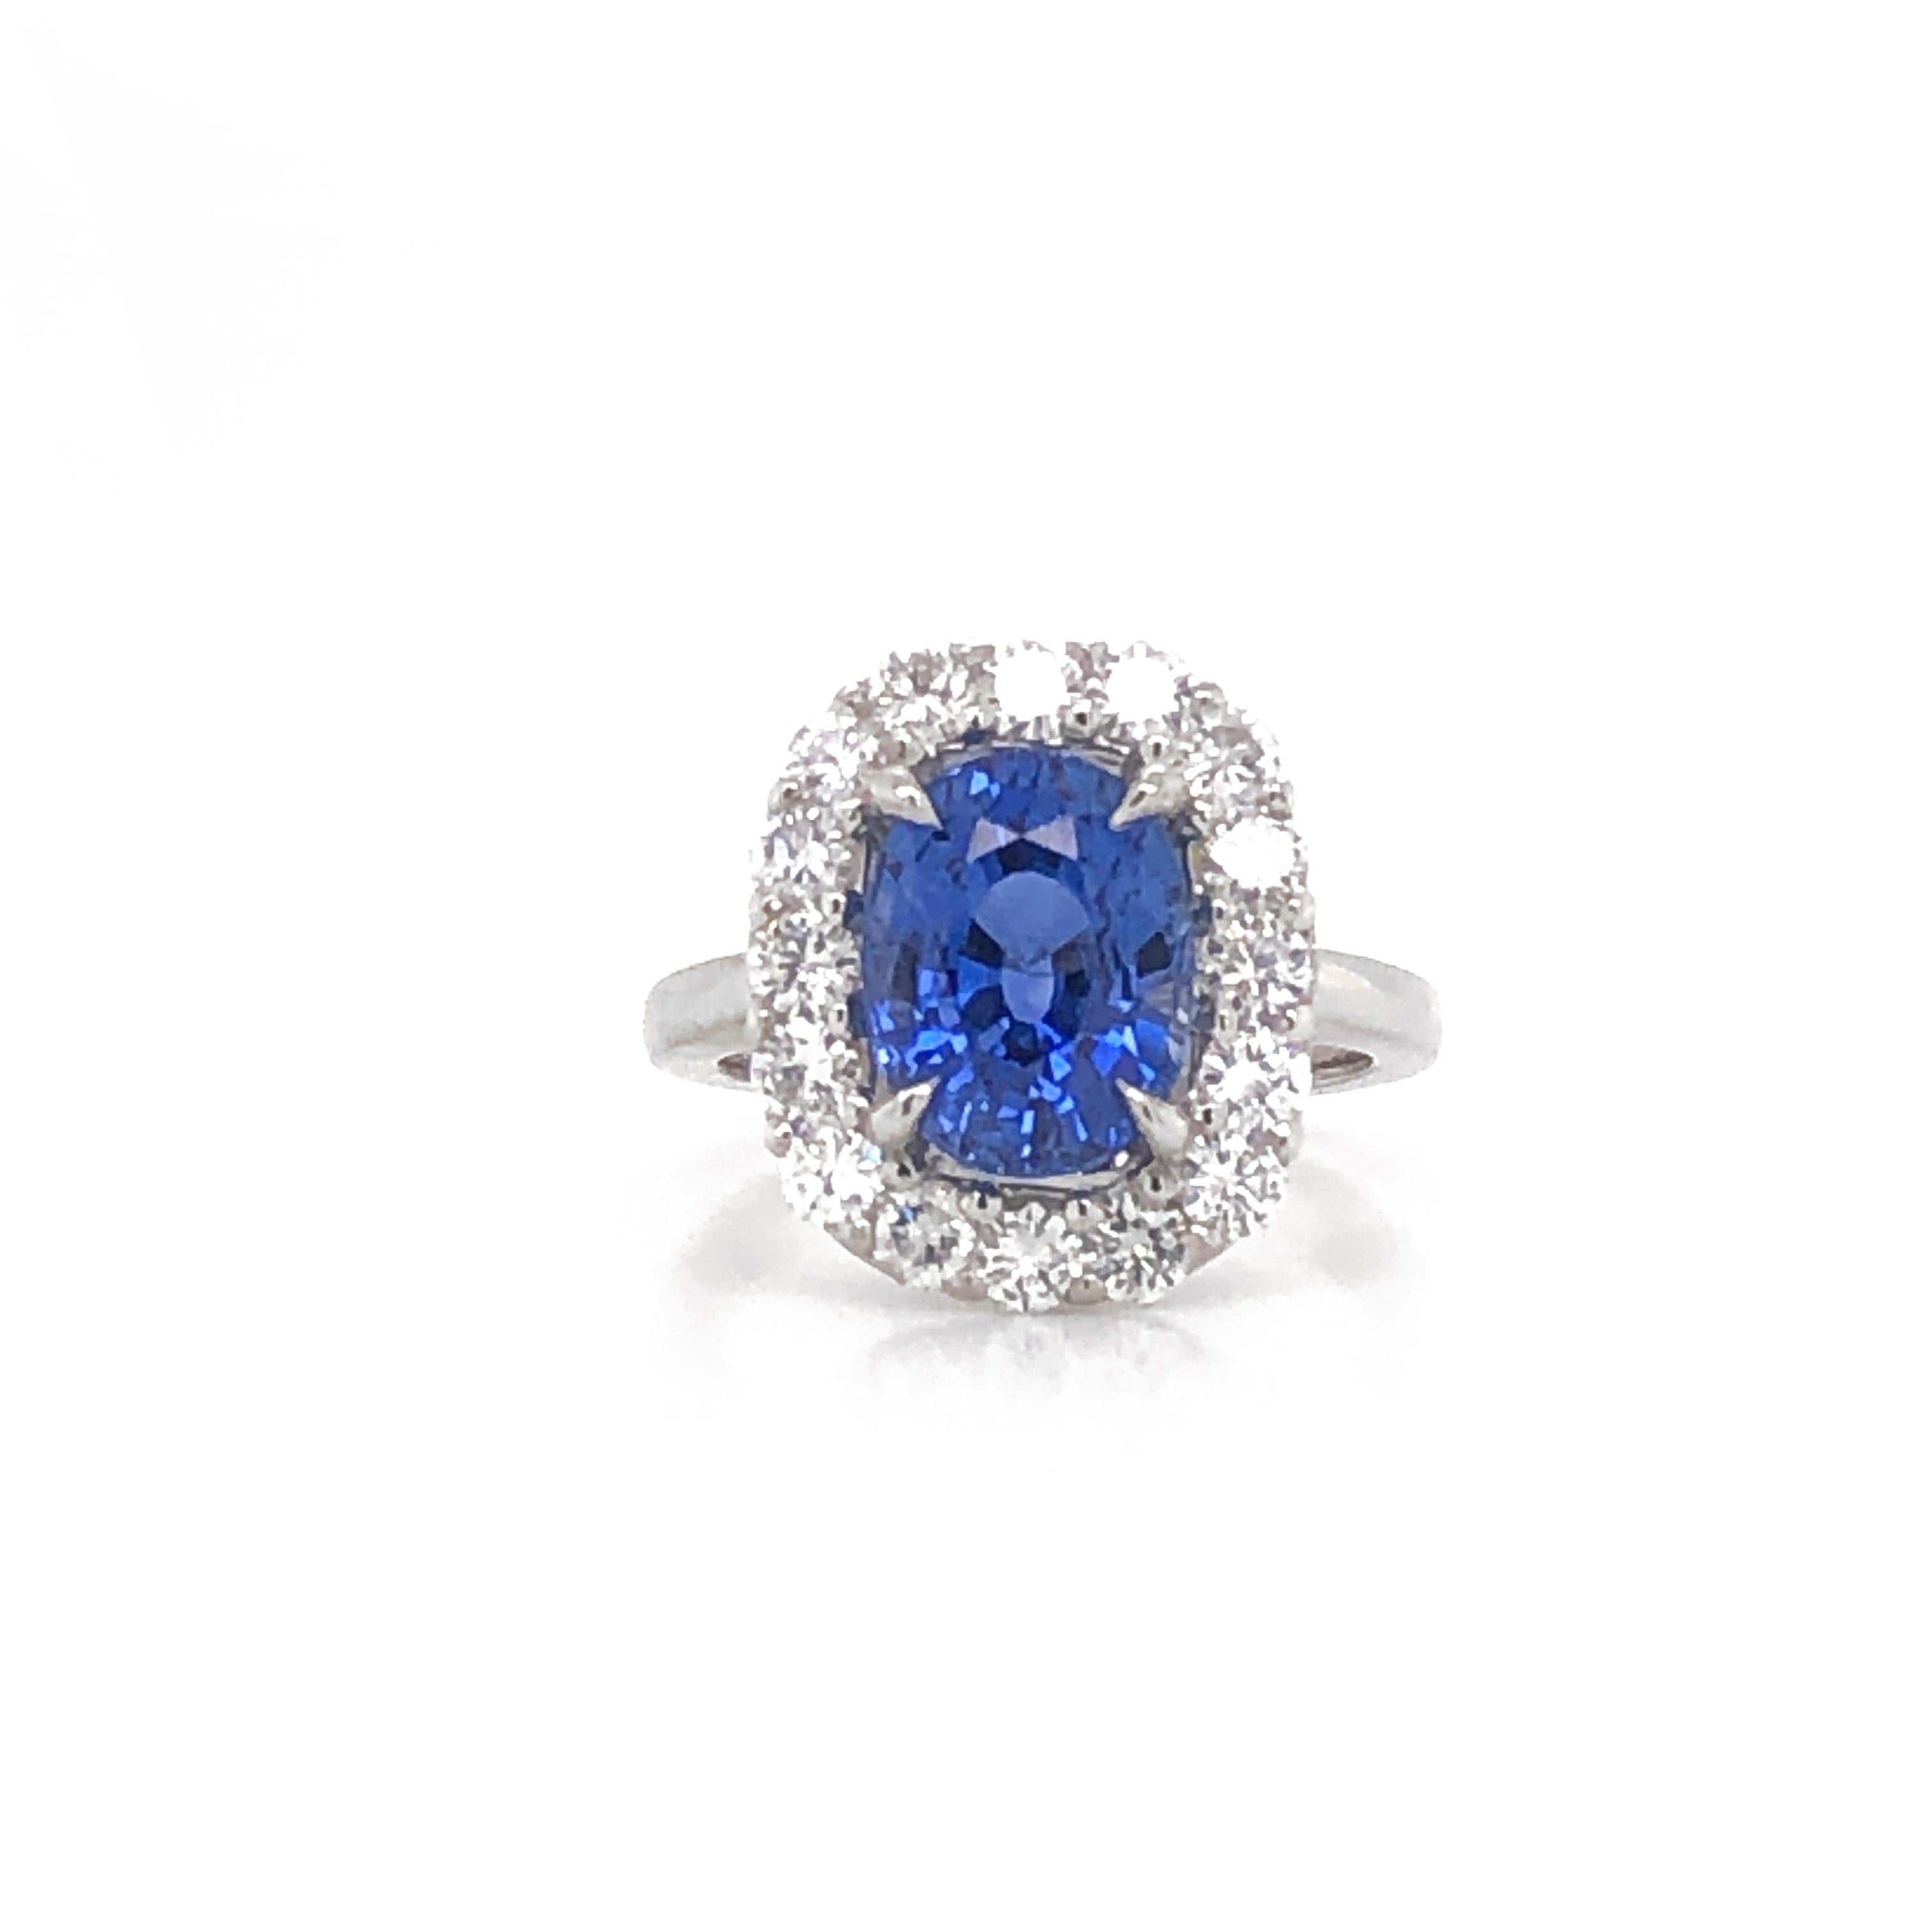 Cocktail ring crowned with a blue cushion oval cut ceylon sapphire 4.69 ct. 
Surrounded by round white natural diamonds 1.28 ct in G-H Color Clarity VS.
Ring is platinum 950 metal. 
Length: 1.6 cm
Width: 1.3 cm
Weight: 10.23 g . 